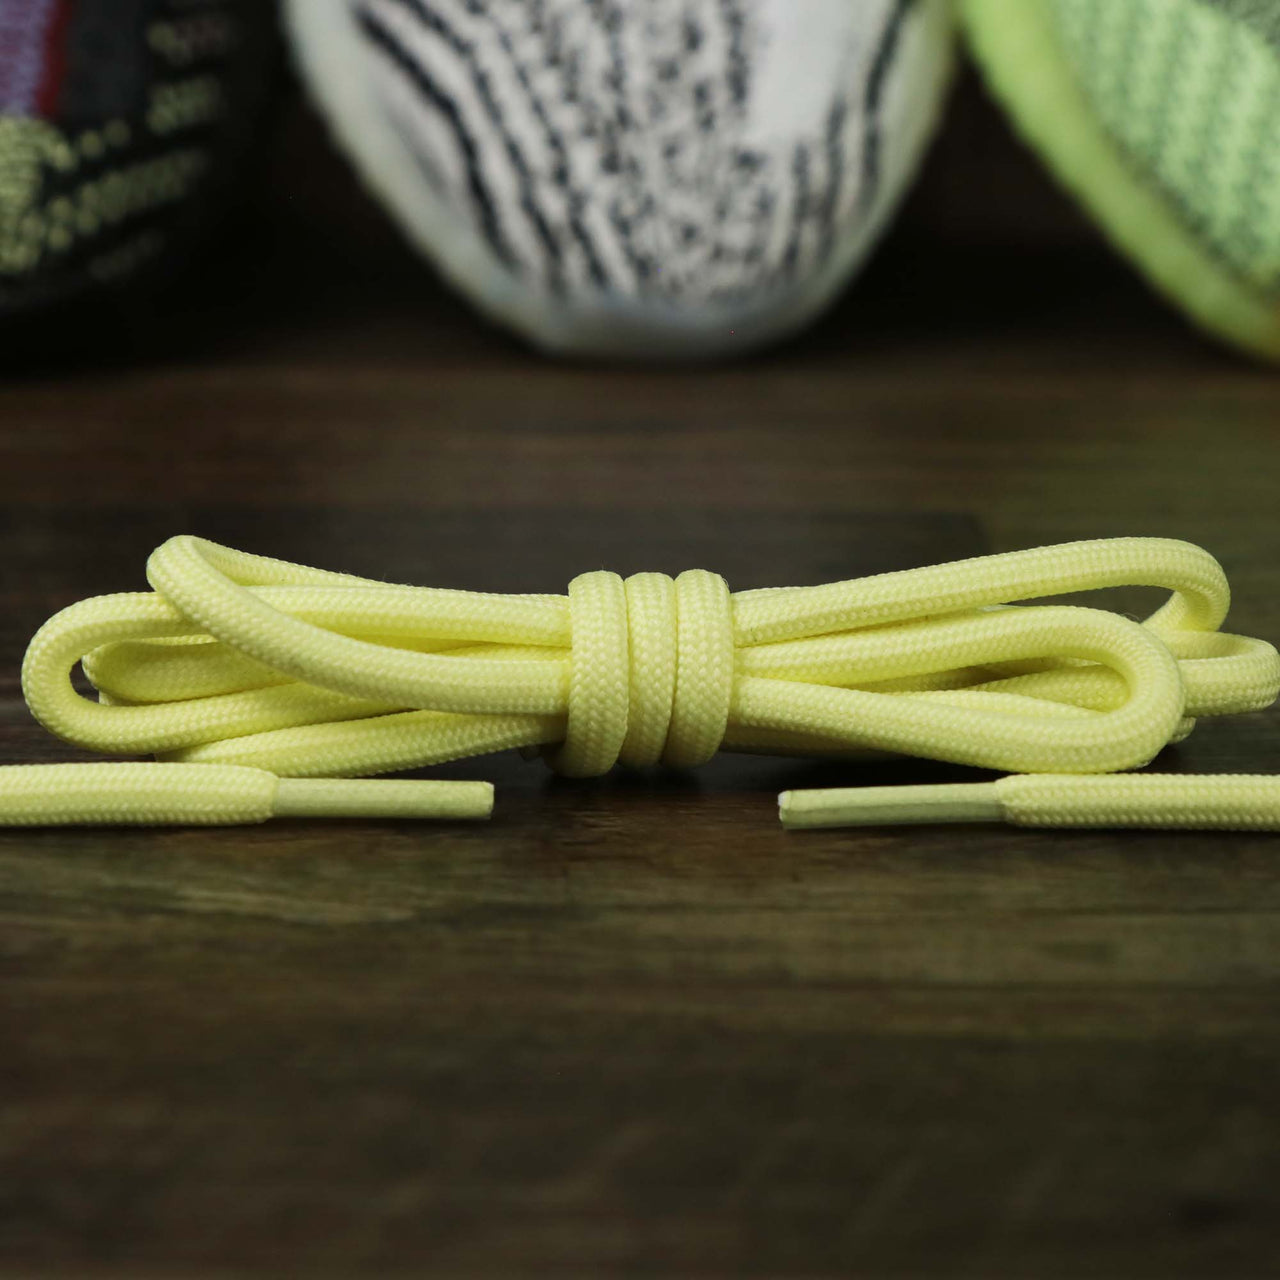 The Solid Rope Daisy Shoelaces with Daisey Aglets | 120cm Capswag folded up
